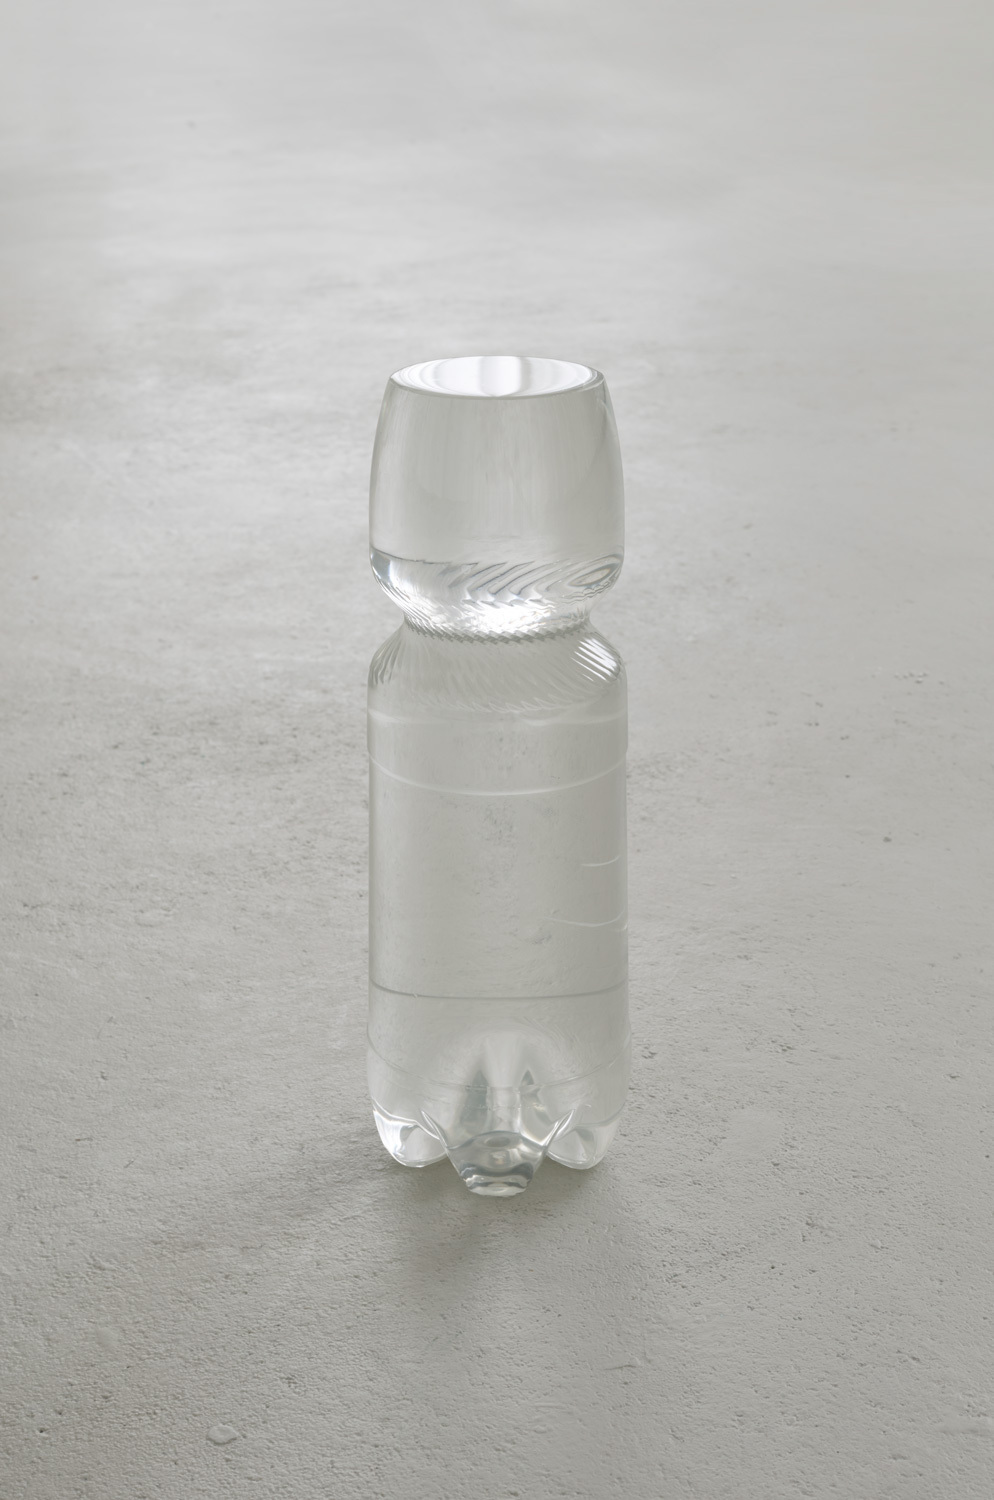 Tarik Hayward, Pure Life, 2021, plastic container, water extracted from pig blood, variable size.